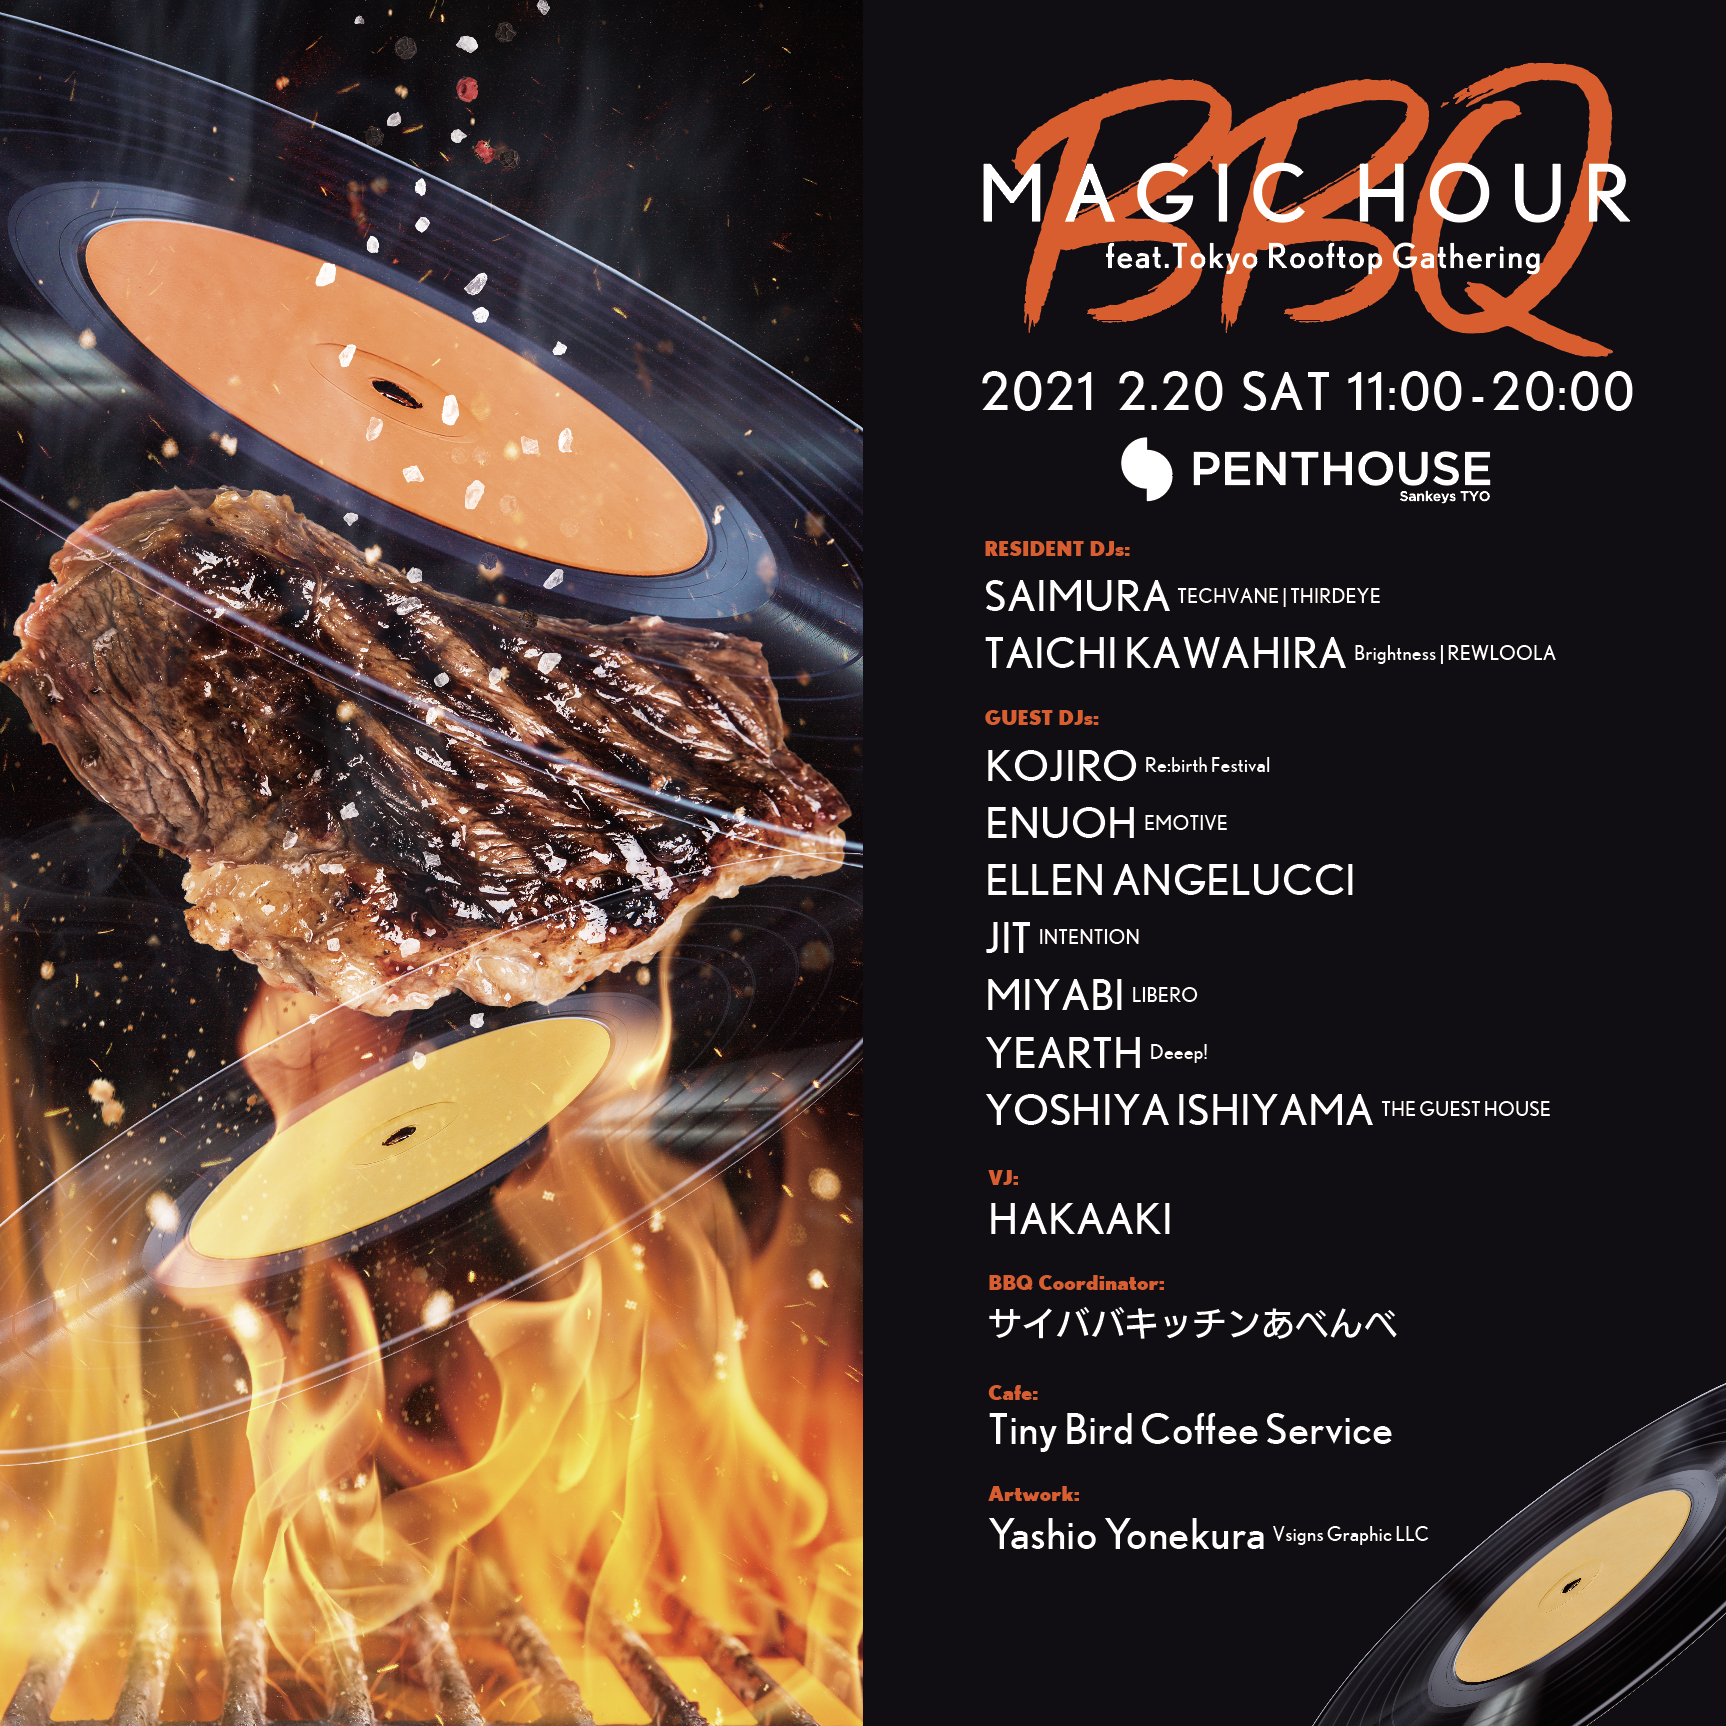 MAGIC HOUR BBQ -Presented by Tokyo Rooftop Gathering-